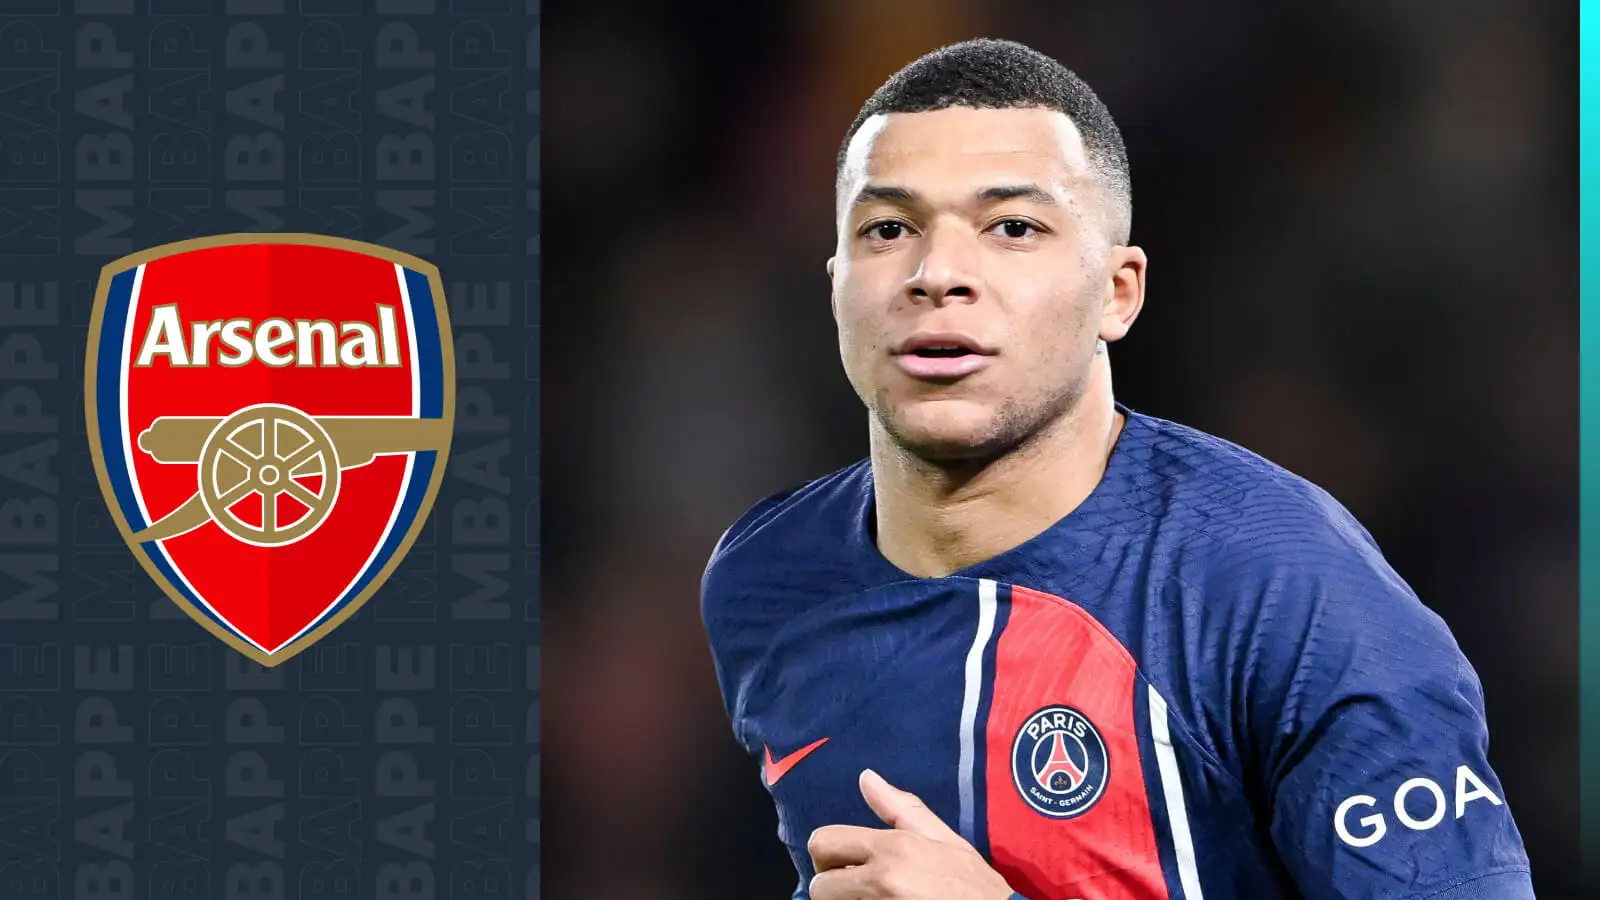 The Arsenal crest close to Kylian Mbappe.